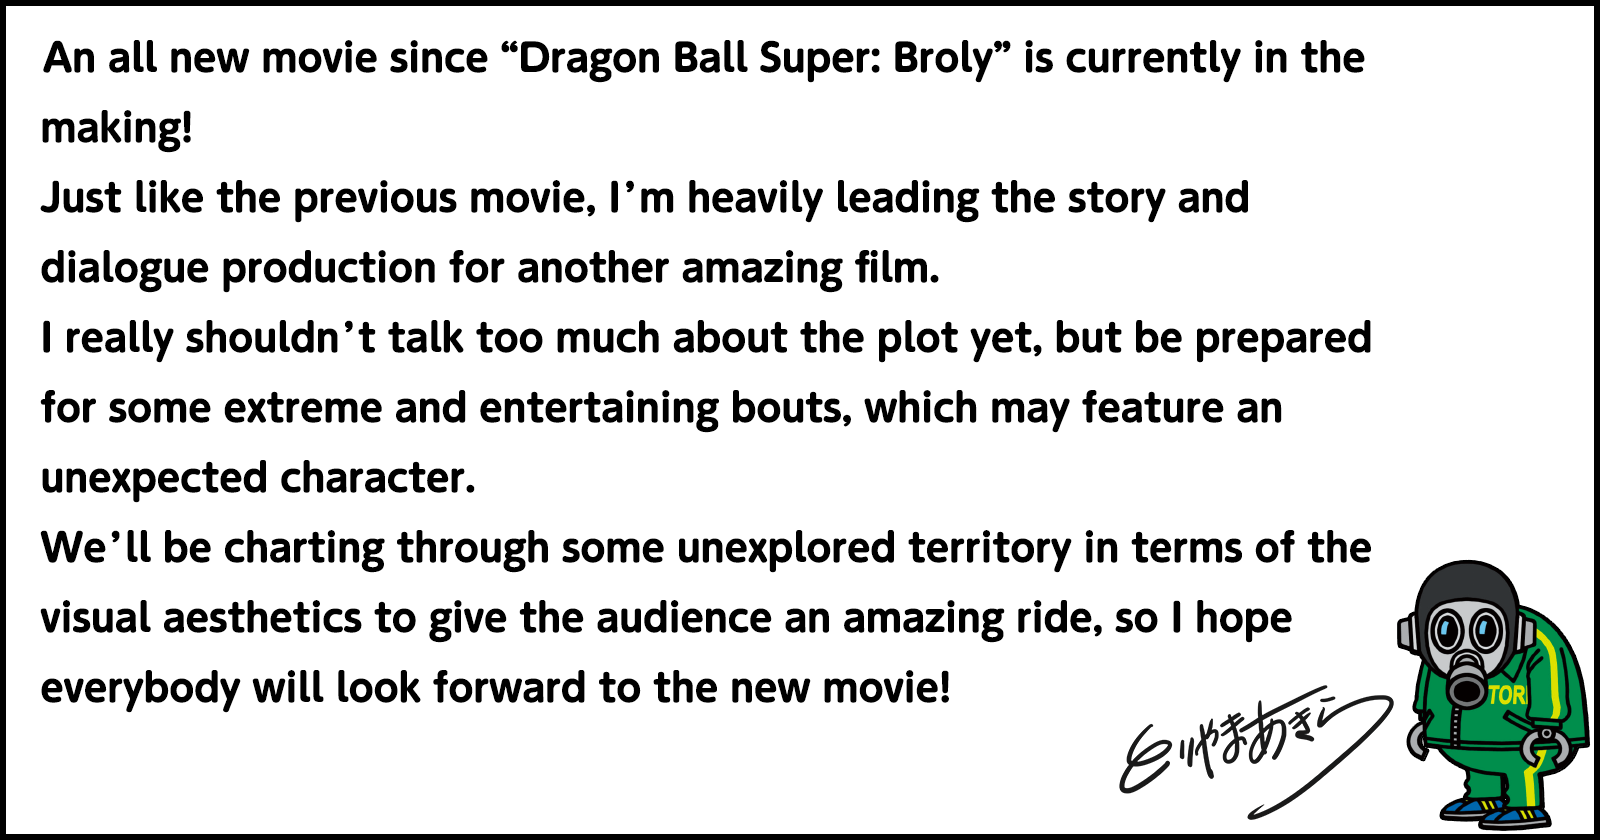 TOEI ANIMATION MAKES SPECIAL ANNOUNCEMENT OF NEW “DRAGON BALL SUPER” MOVIE IN 2022